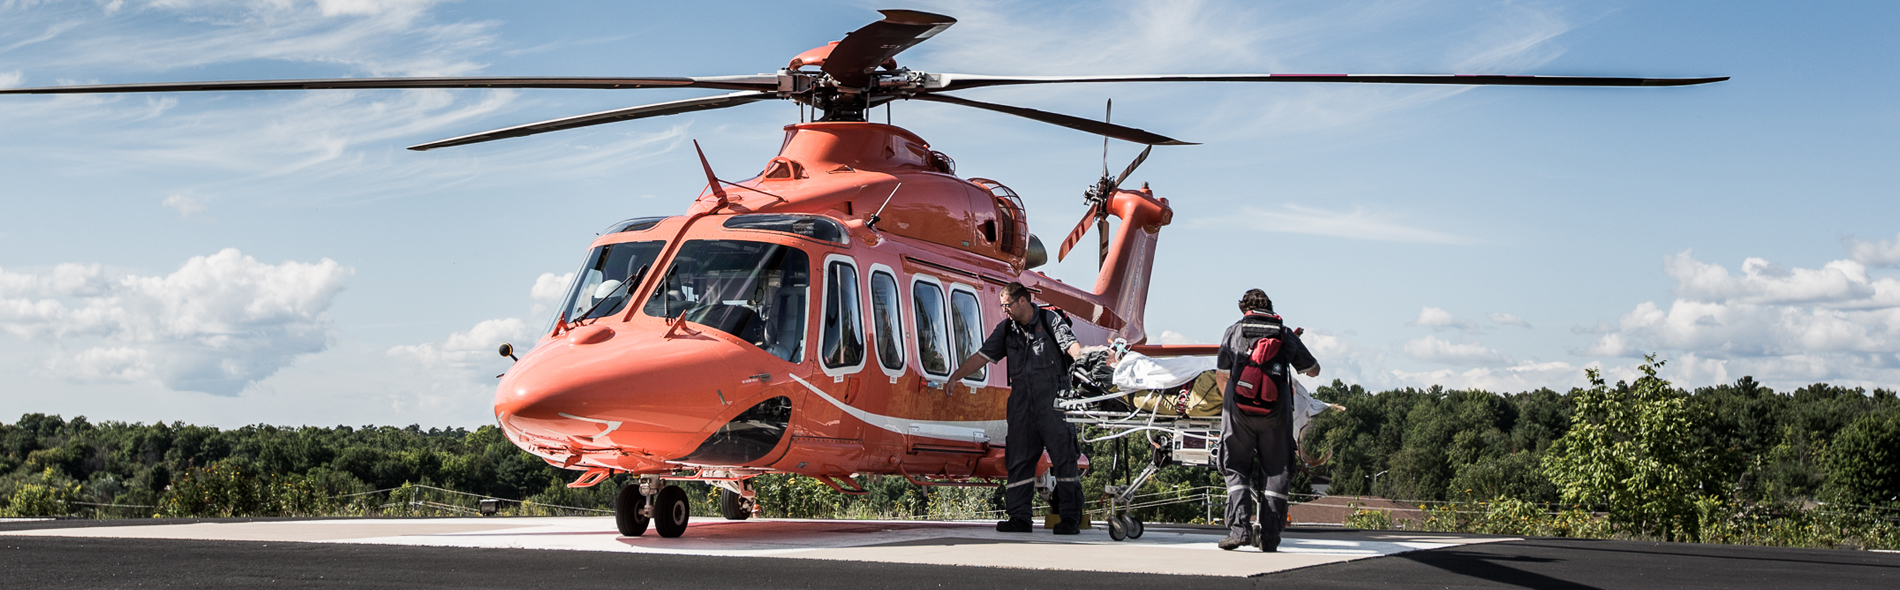 A group of paramedics waking towards an Ornge helicopter